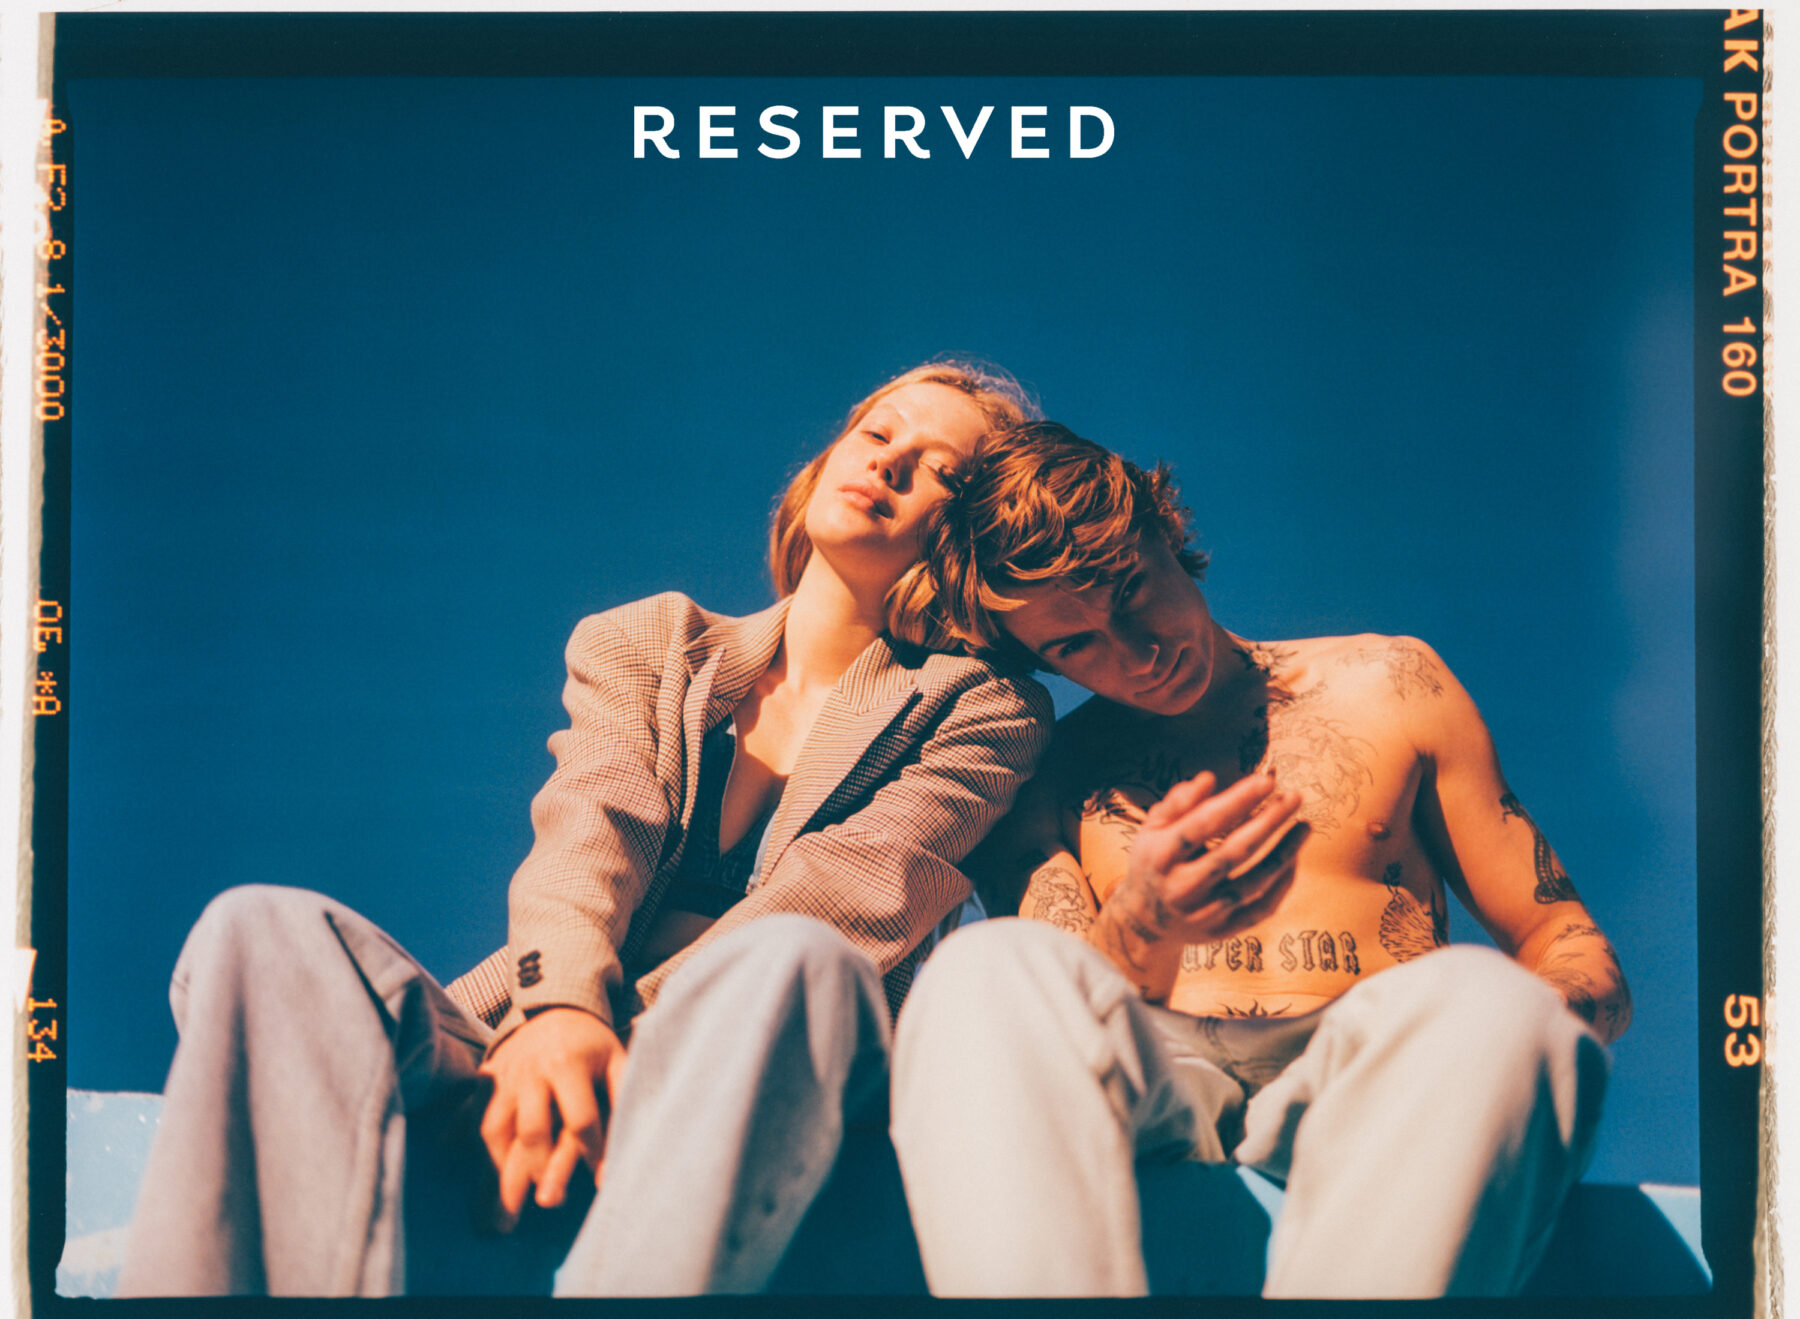 Commercial for Reserved with styling by Janek Kryszczak